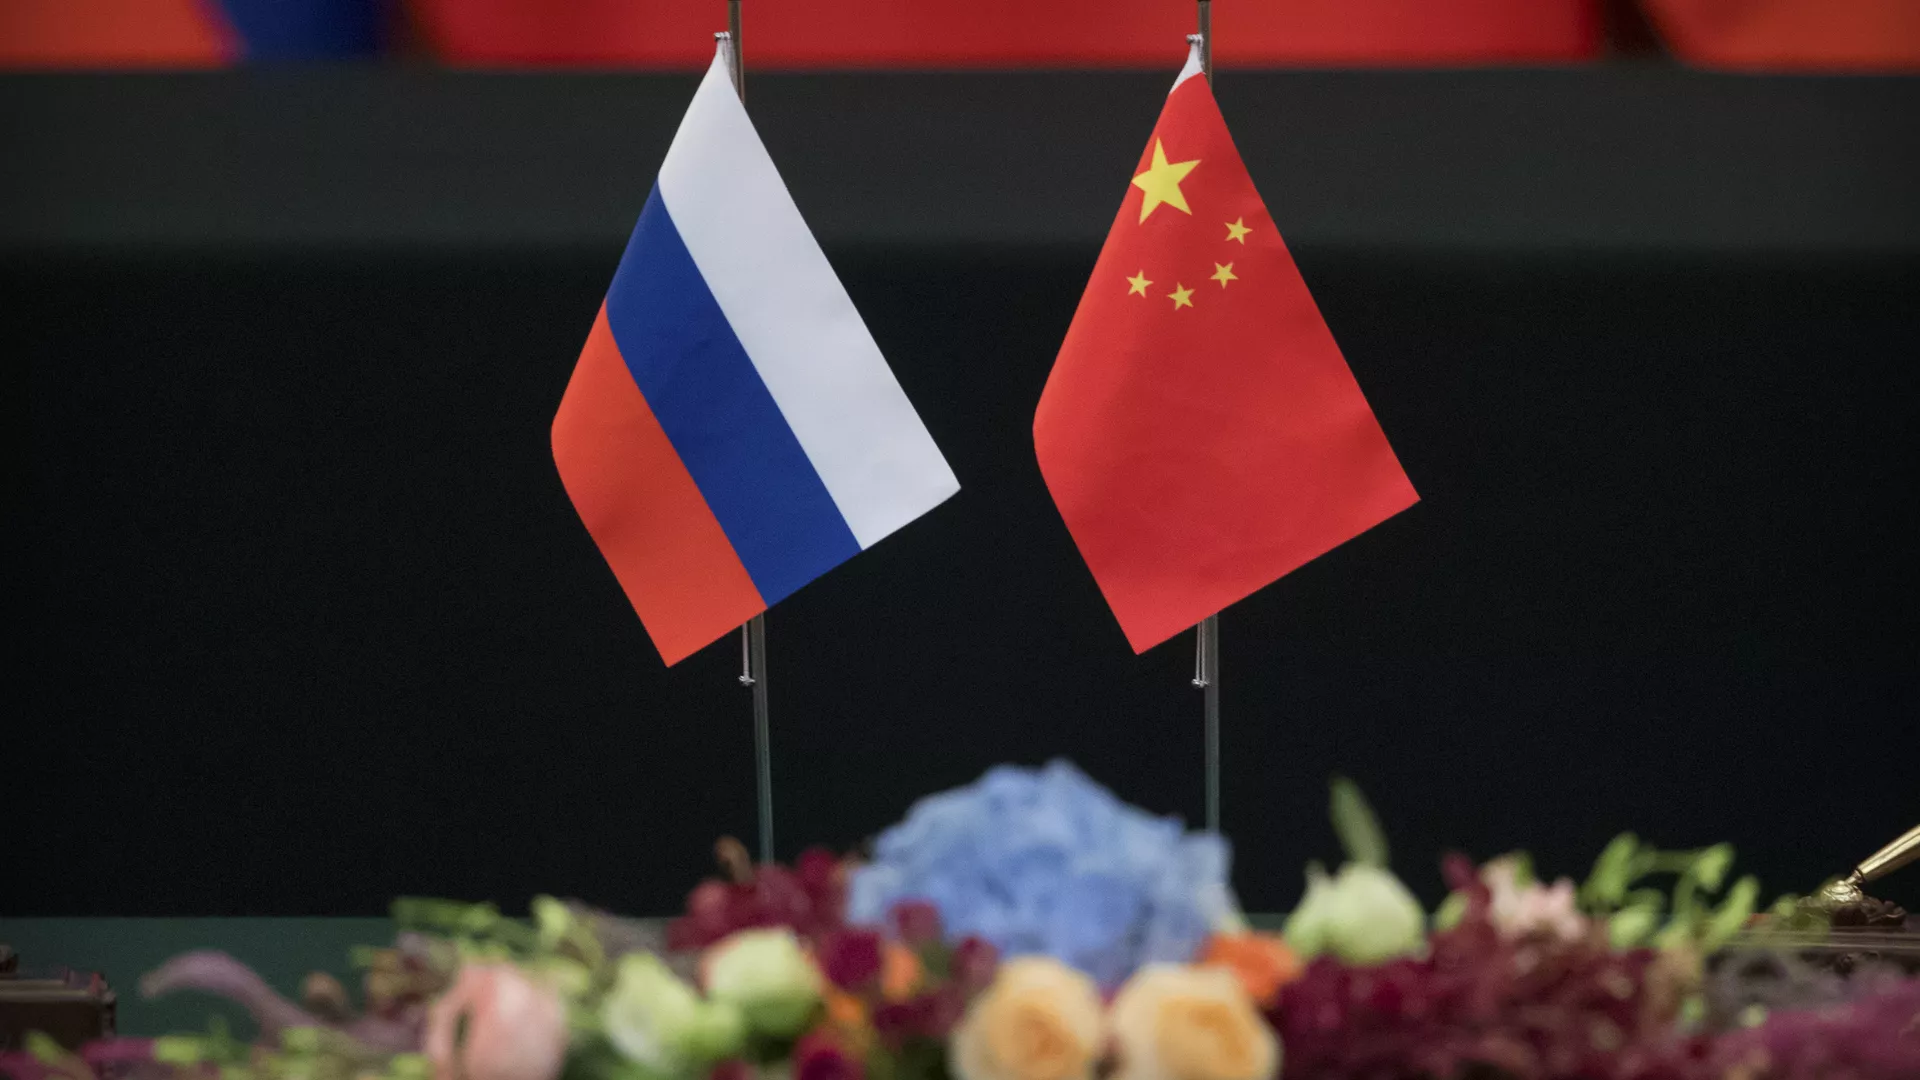 Russian, left, and Chinese flags sit on a table before a signing ceremony at the Great Hall of the People in Beijing - 永利官网卫星通讯社, 1920, 14.01.2022